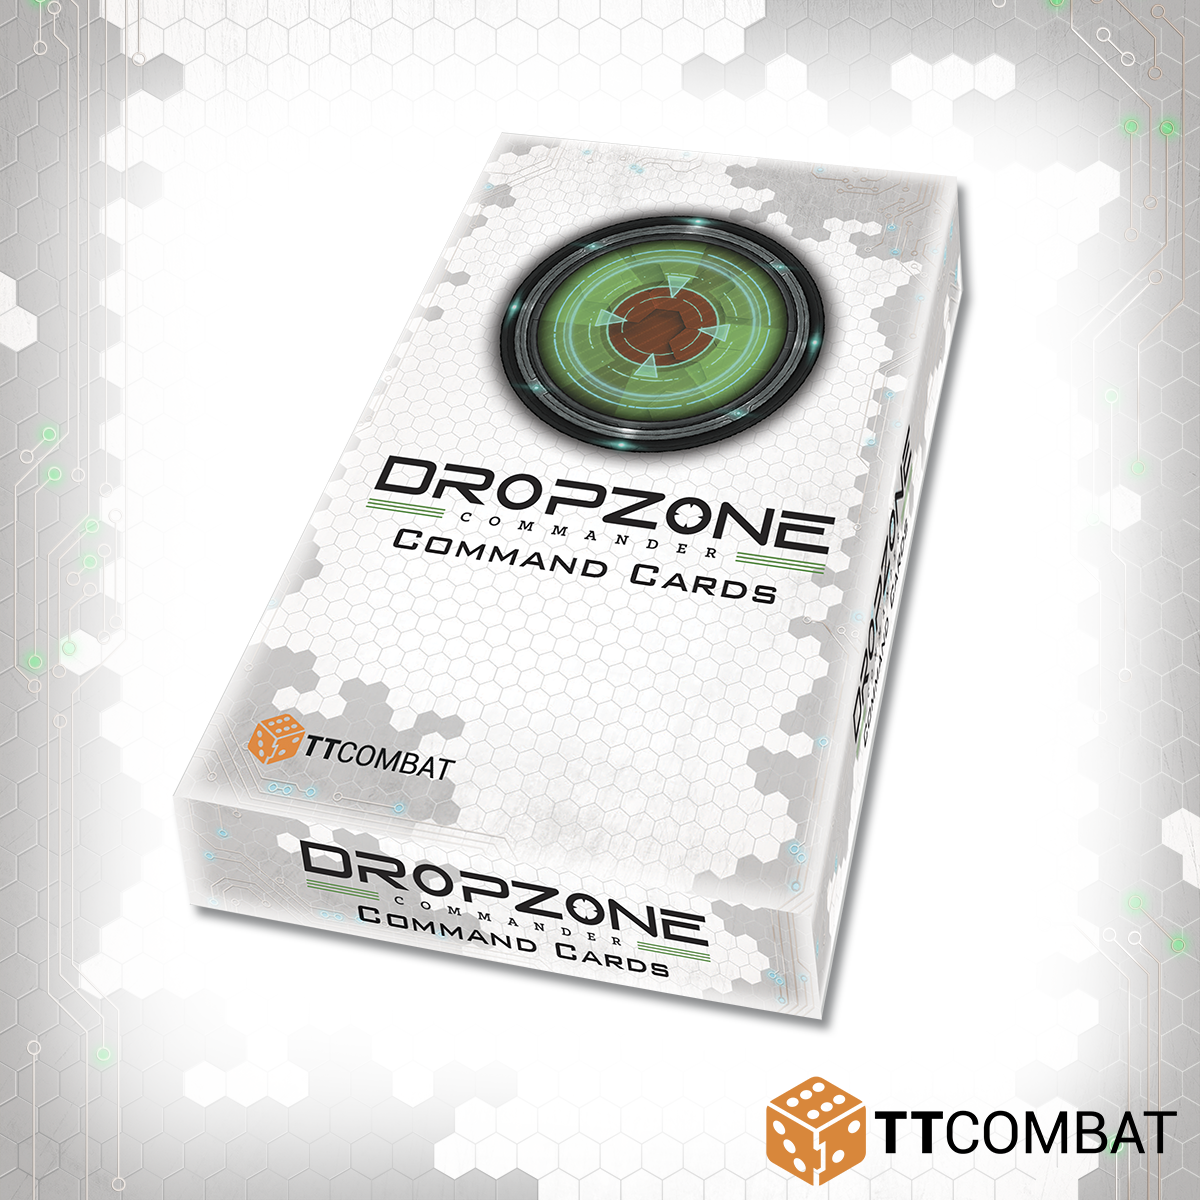 drop zone commander command cards in box